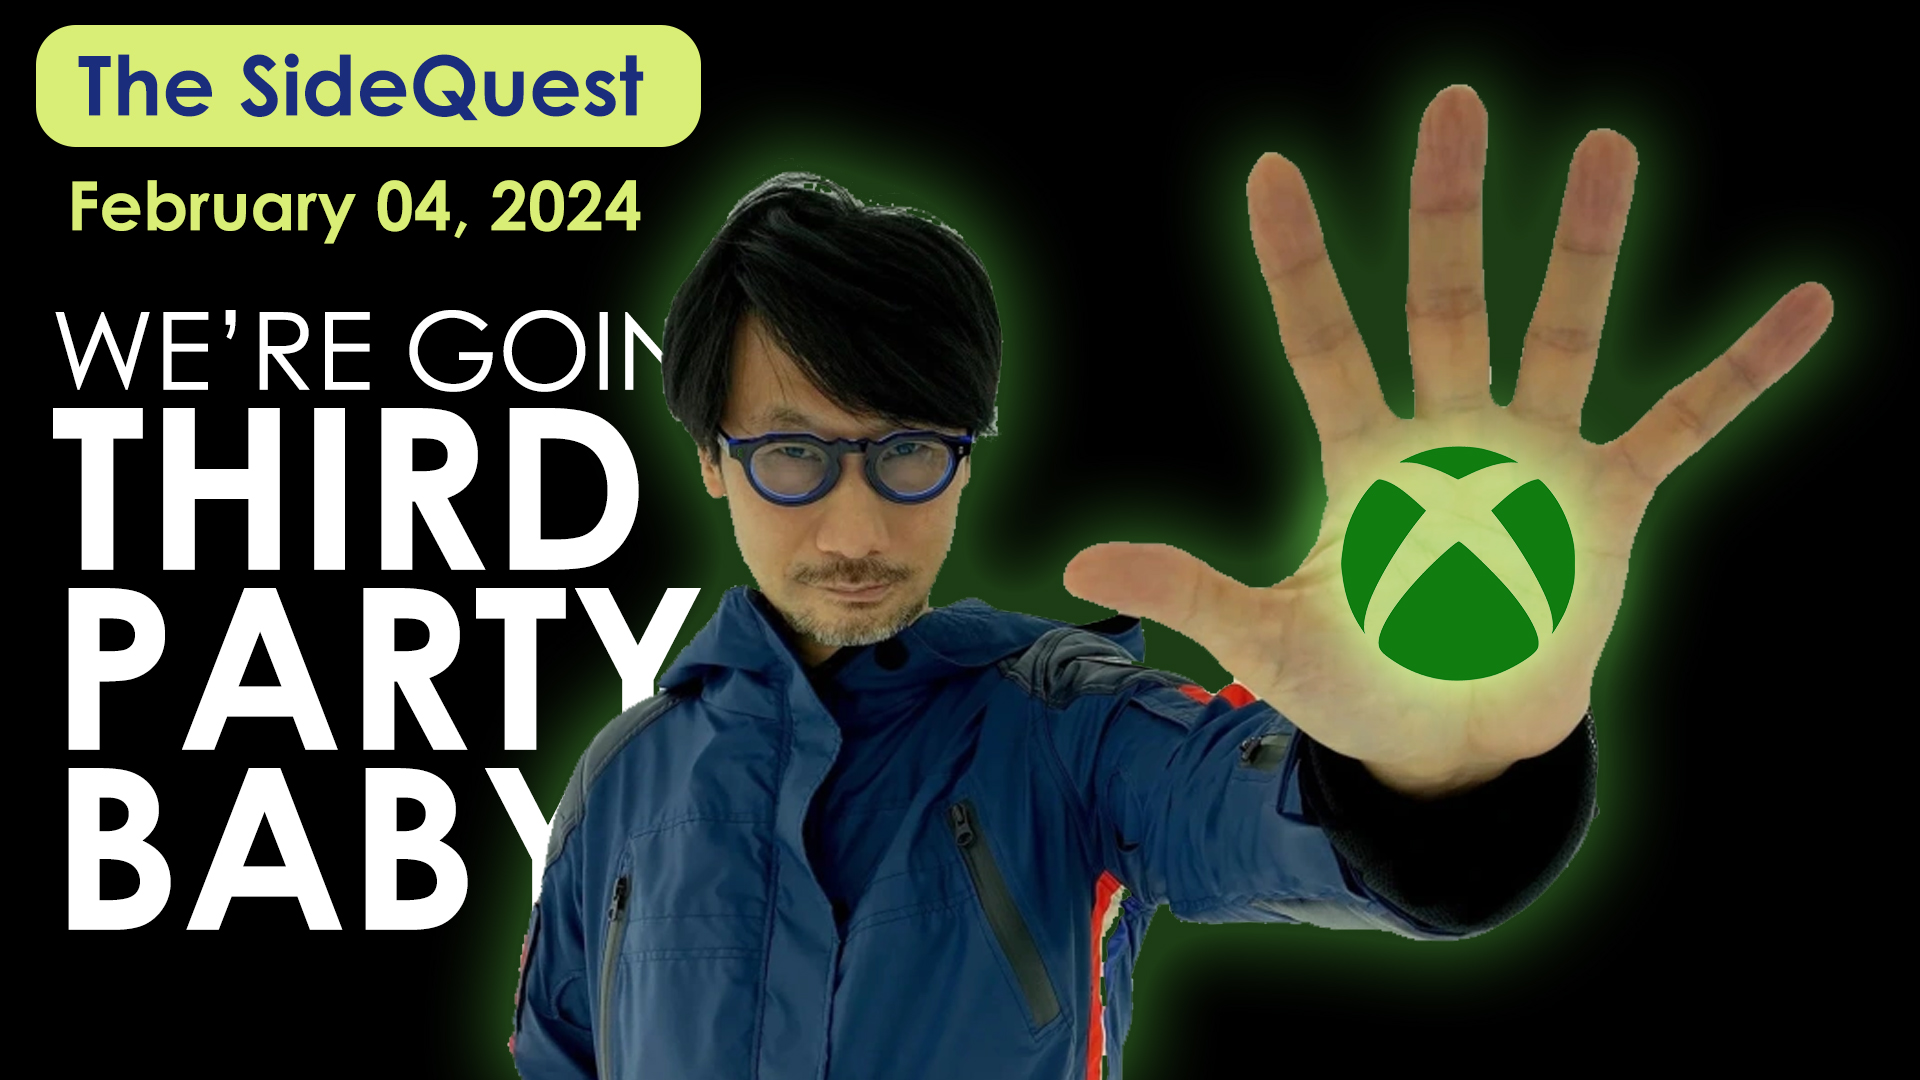 The SideQuest LIVE! February 04, 2024: We’re going third party, baby